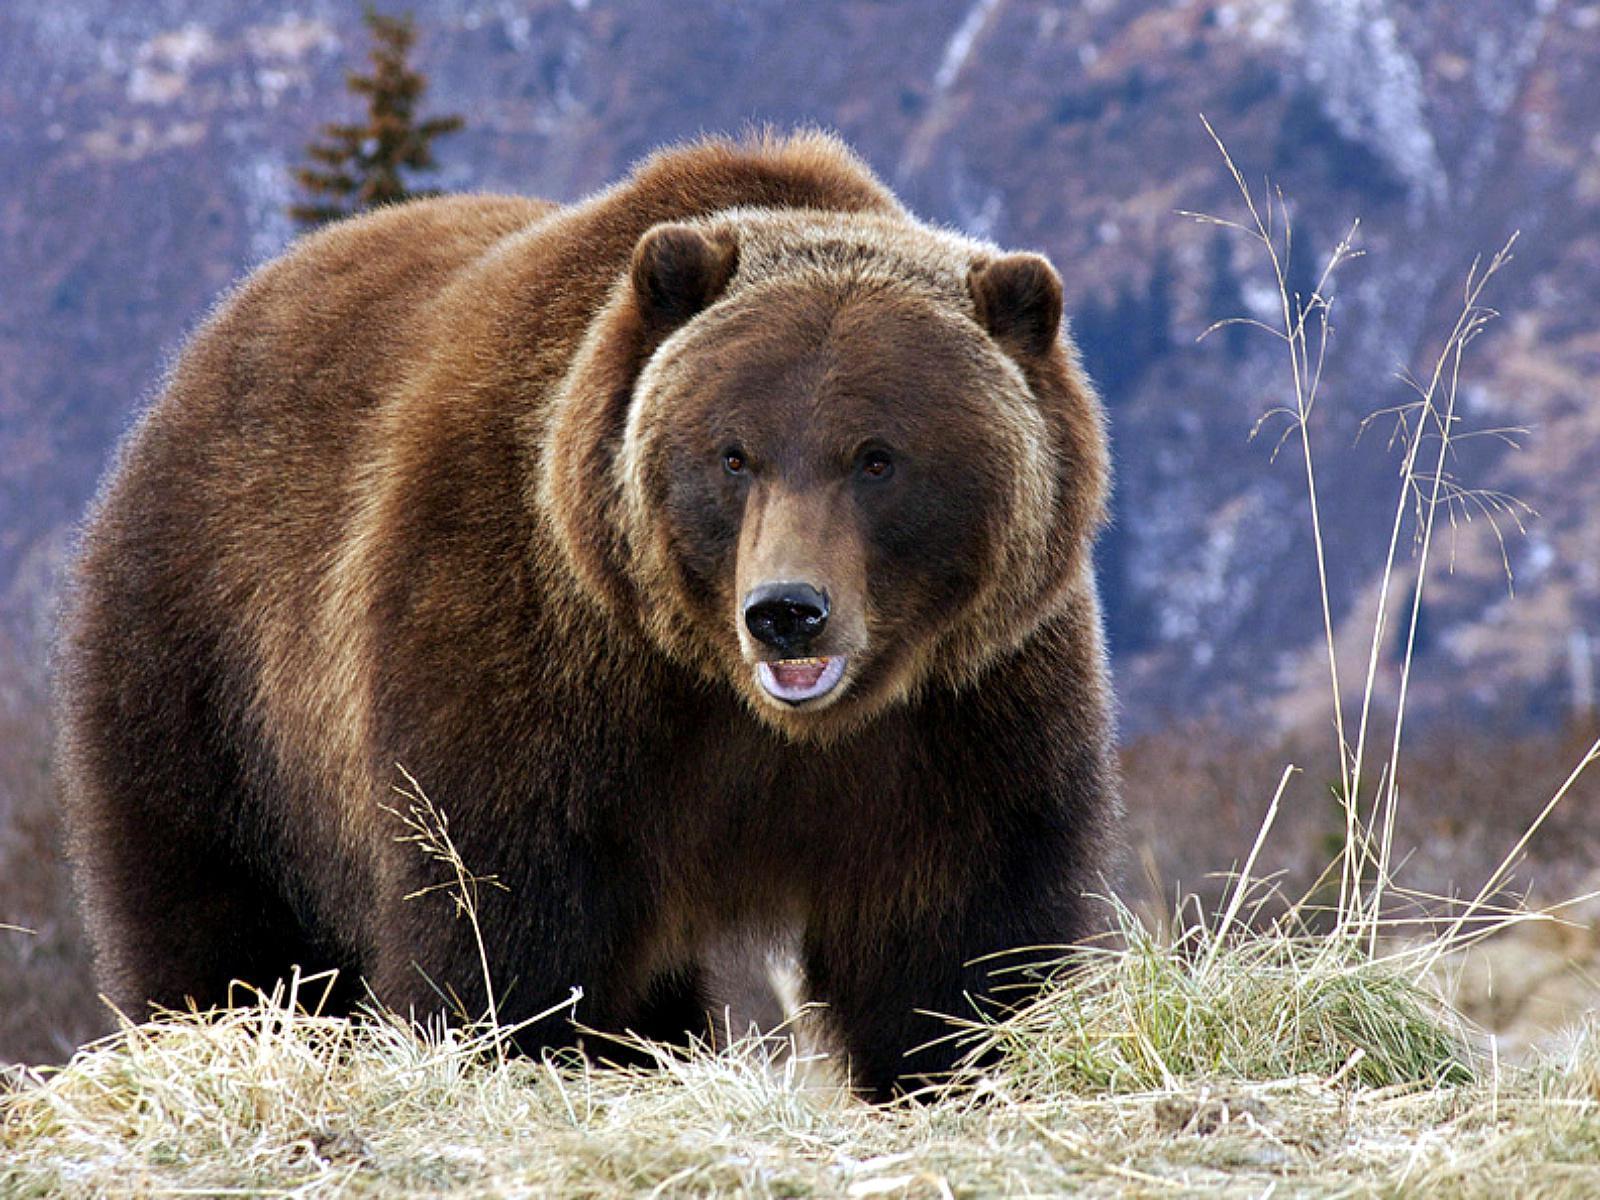 California Grizzly Bear. The Golden State. Bears